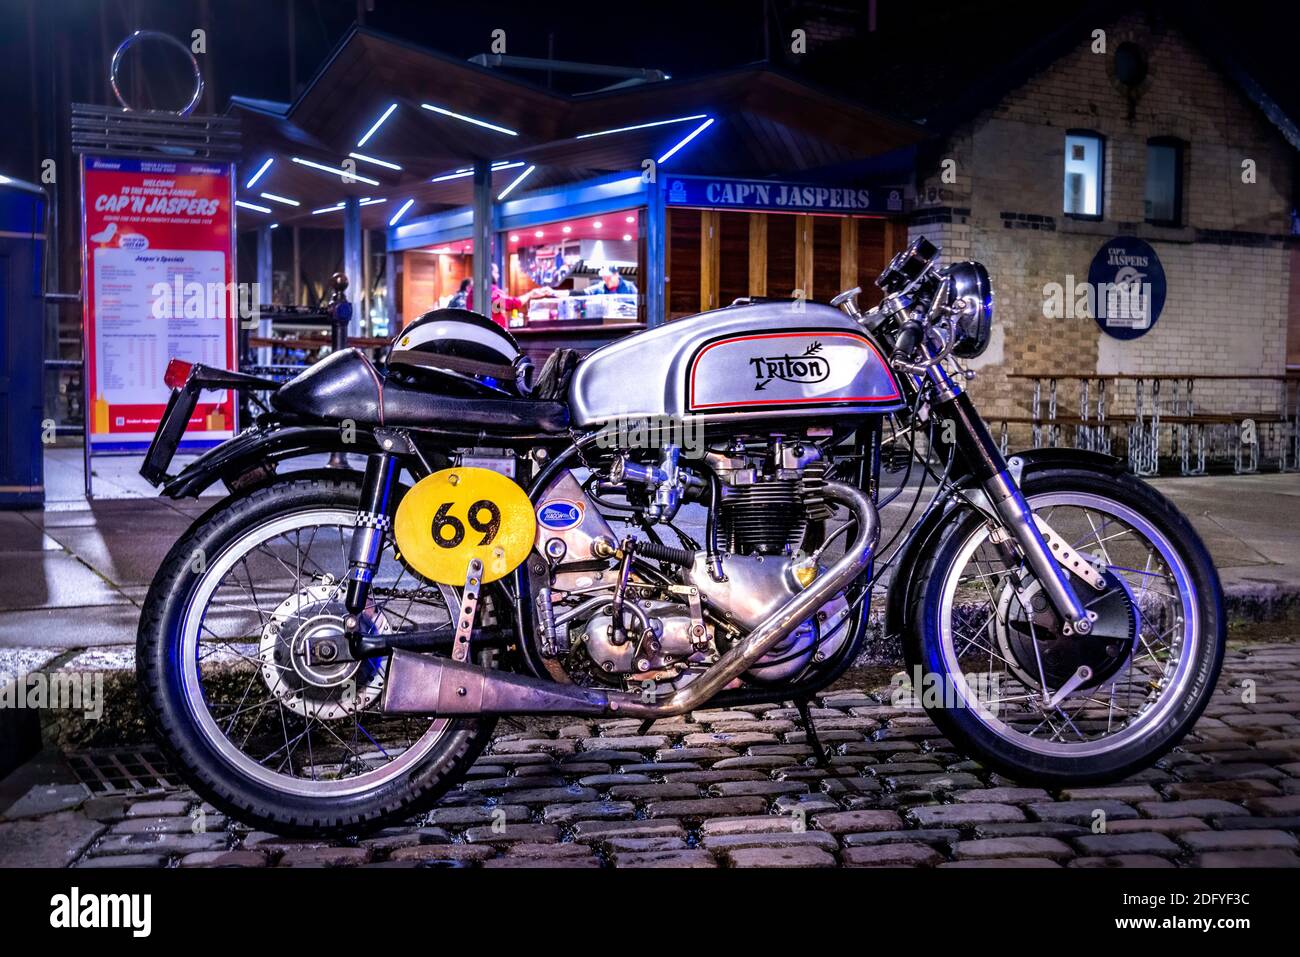 Triton motorbike by Cap'n Jaspers on The Barbican, Plymouth at night. Stock Photo